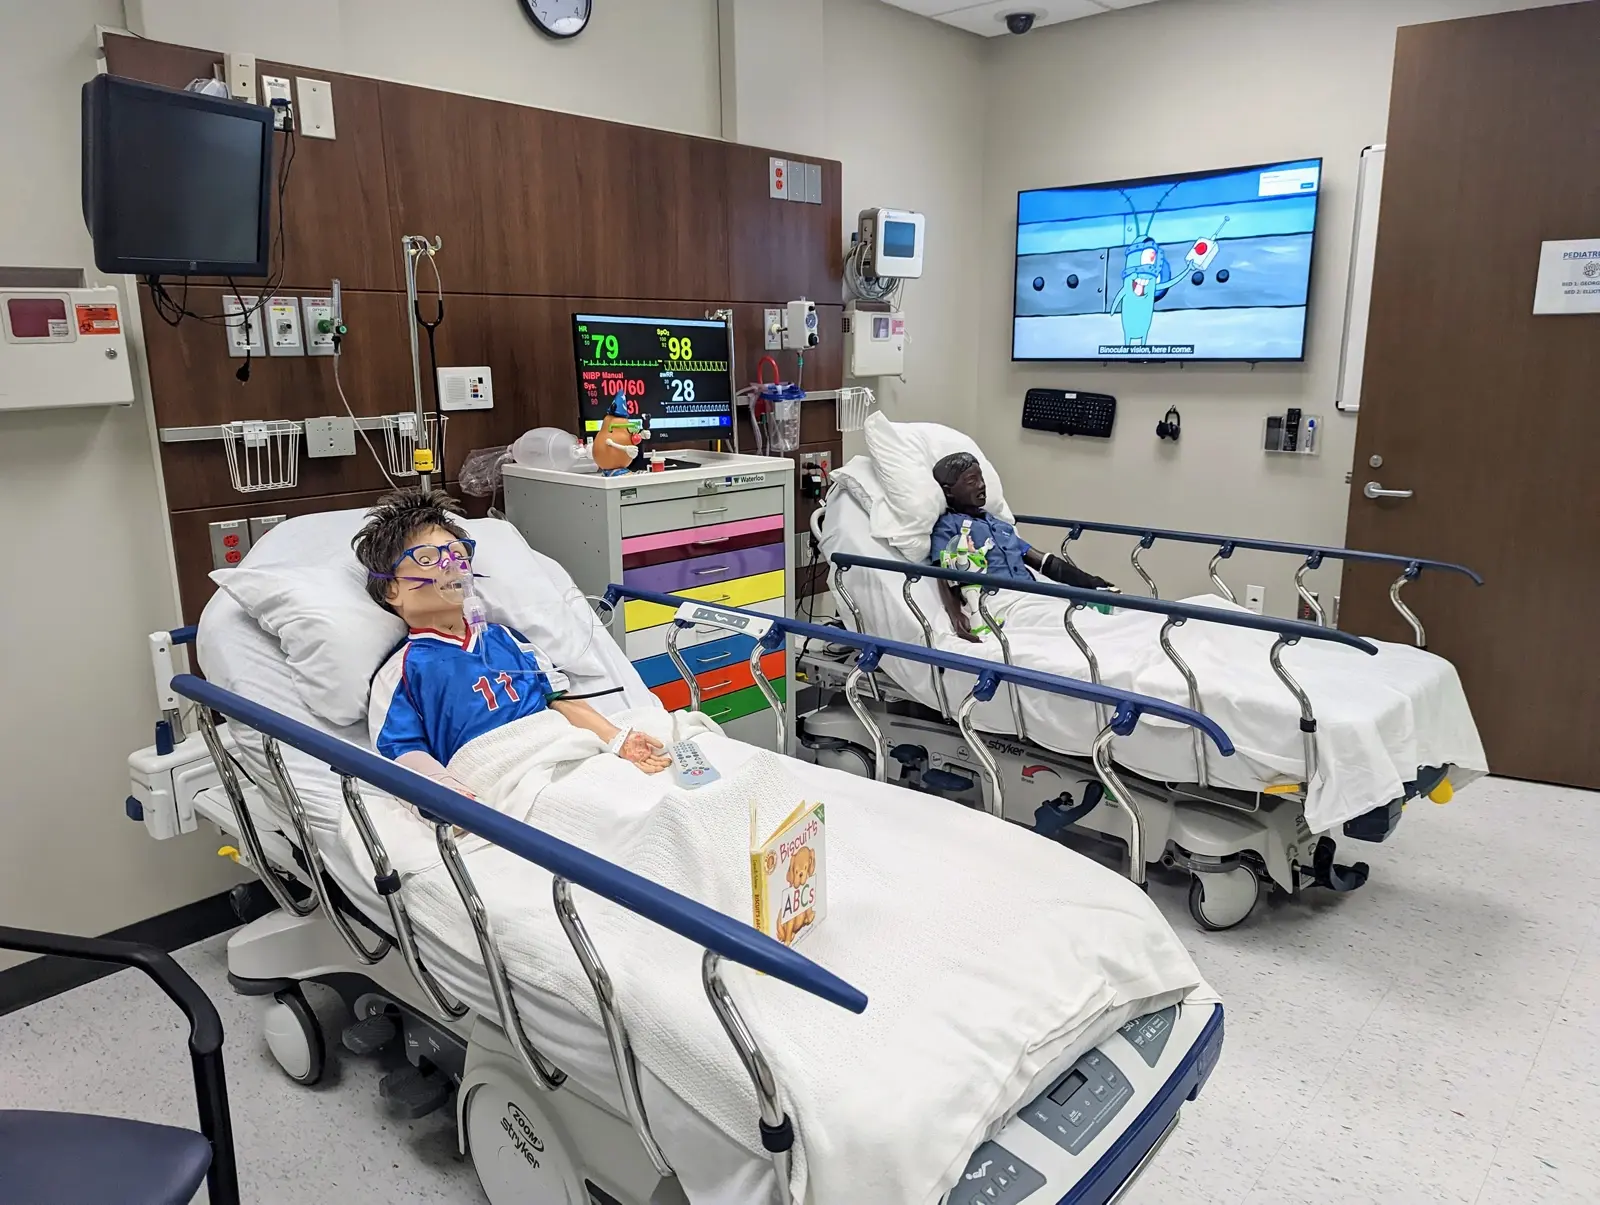 CAMLS Two children lie in hospital beds in a medical room, each connected to monitors displaying vital signs. Both children are watching a cartoon on a TV mounted on the wall. The room includes various medical equipment and storage cabinets.